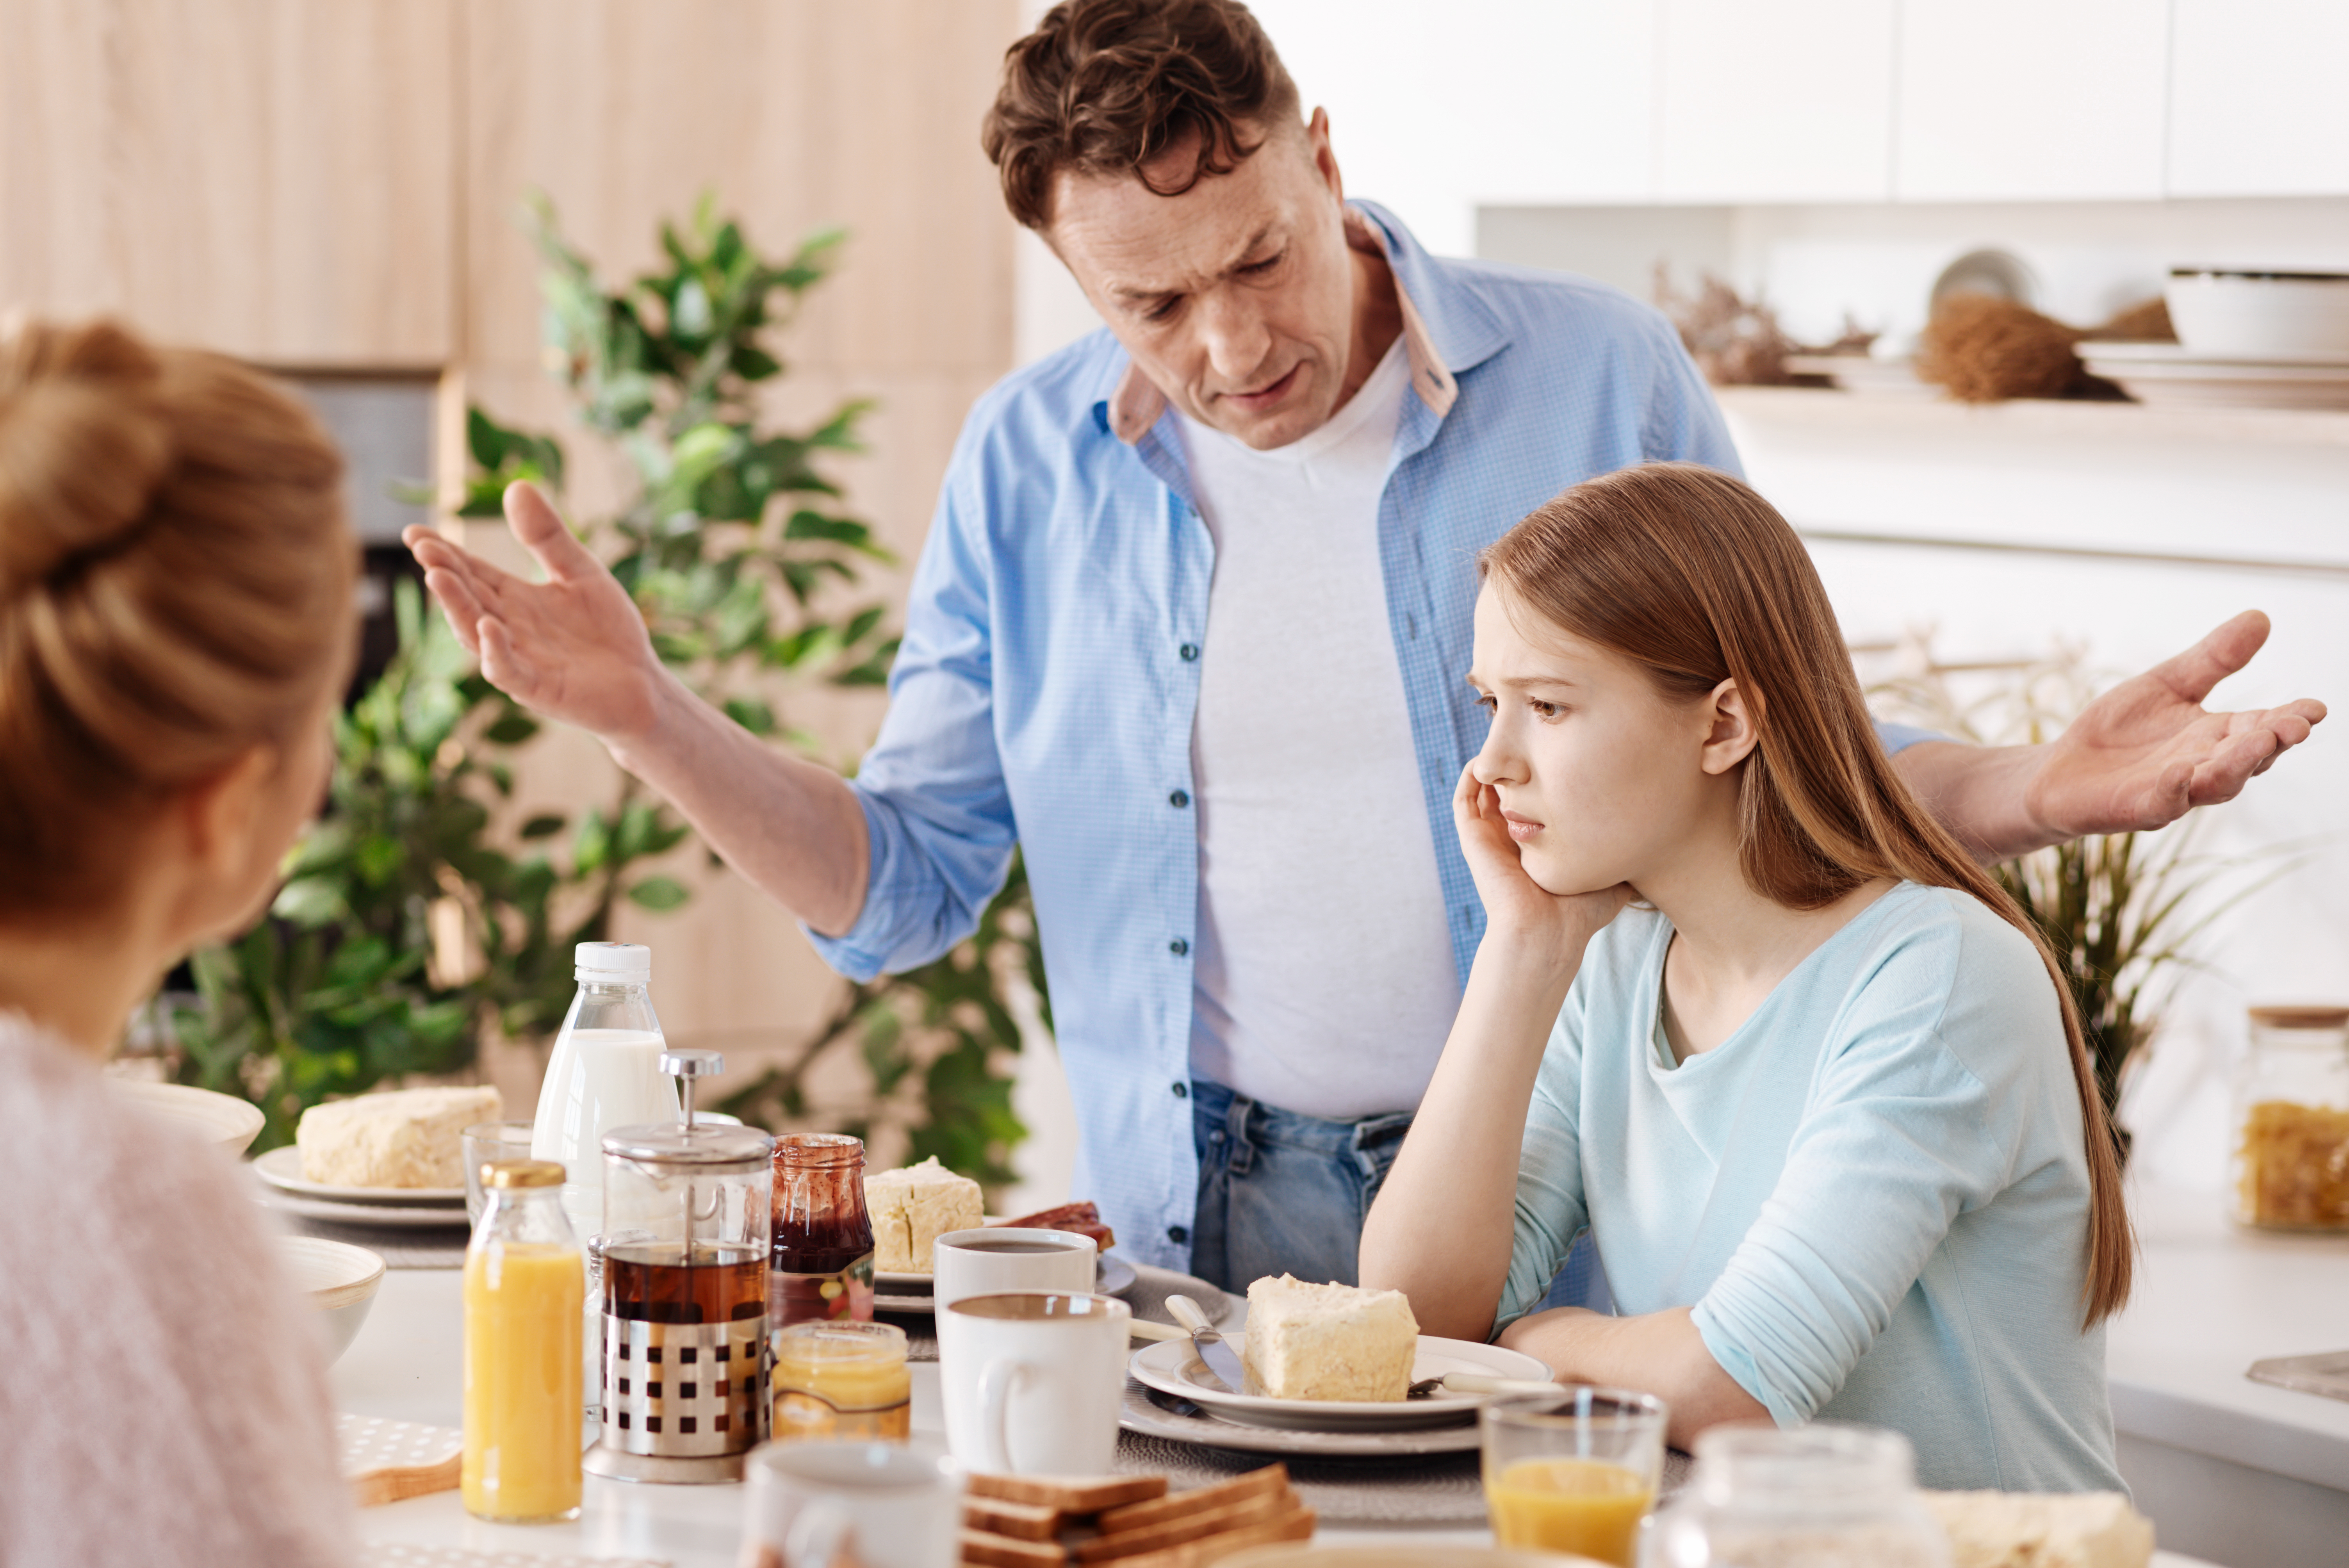 The dad has constantly tried to fix his daughter's behavior. | Source: Shutterstock